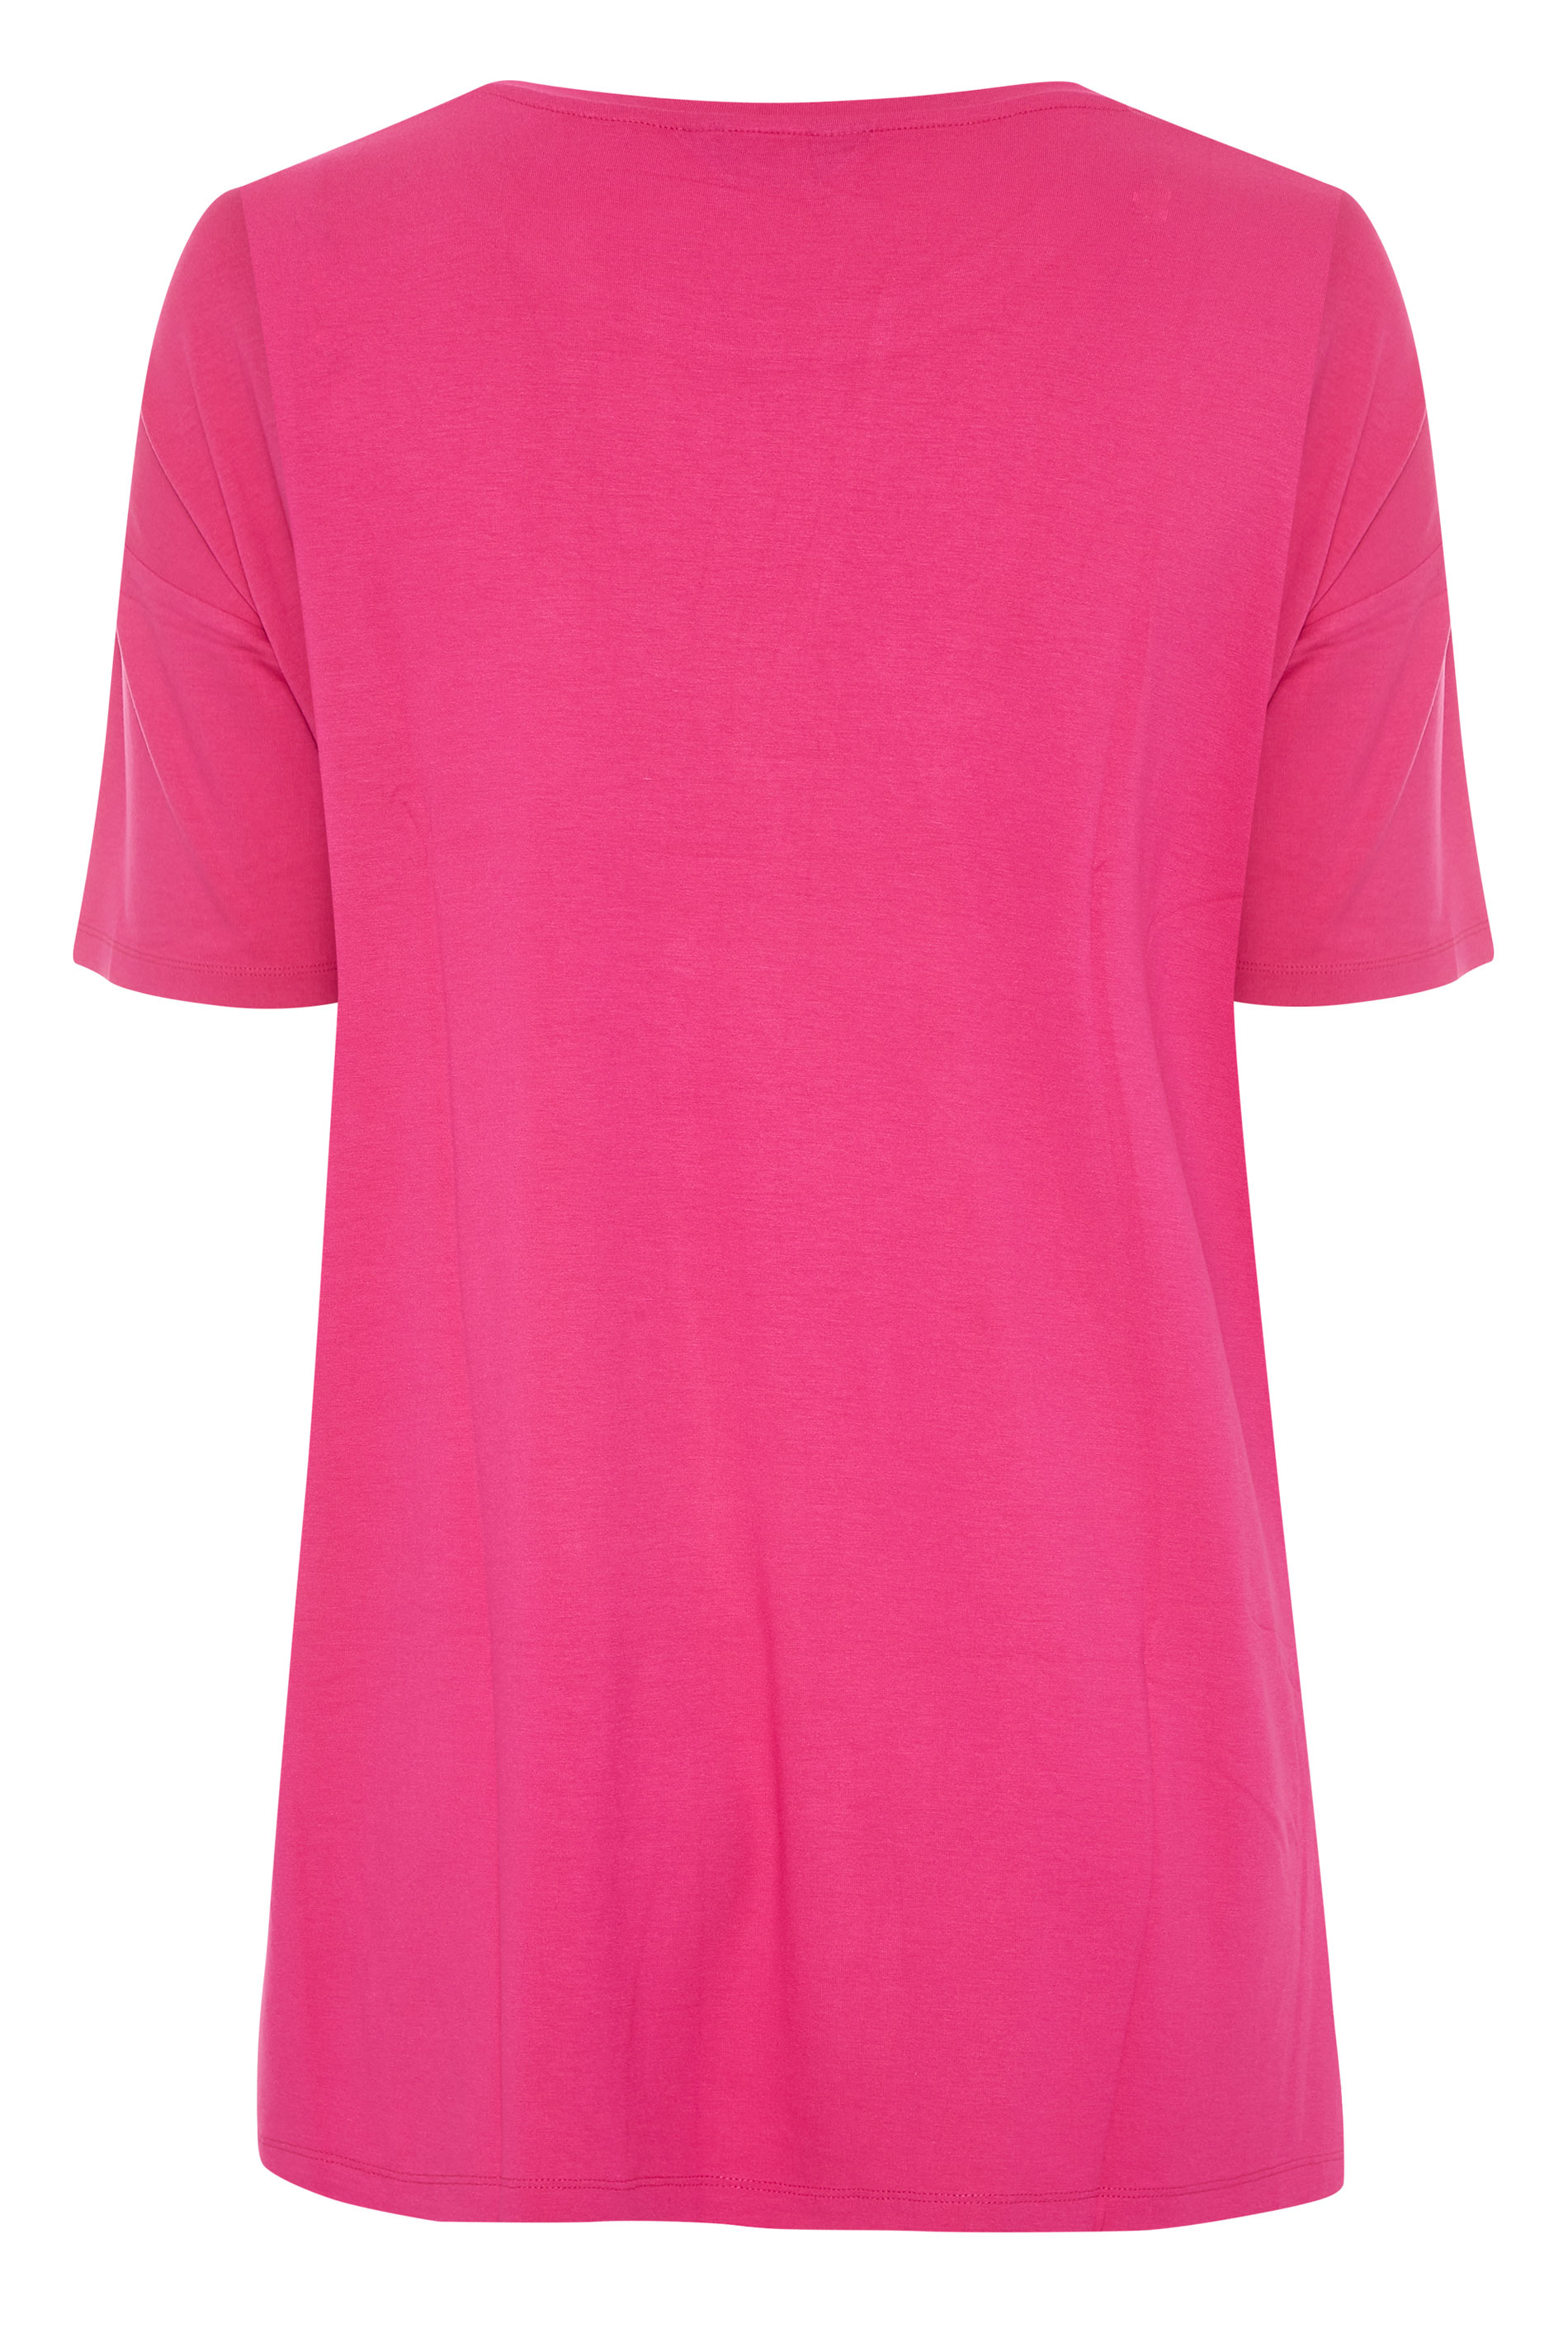 Hot Pink Oversized T-Shirt | Yours Clothing